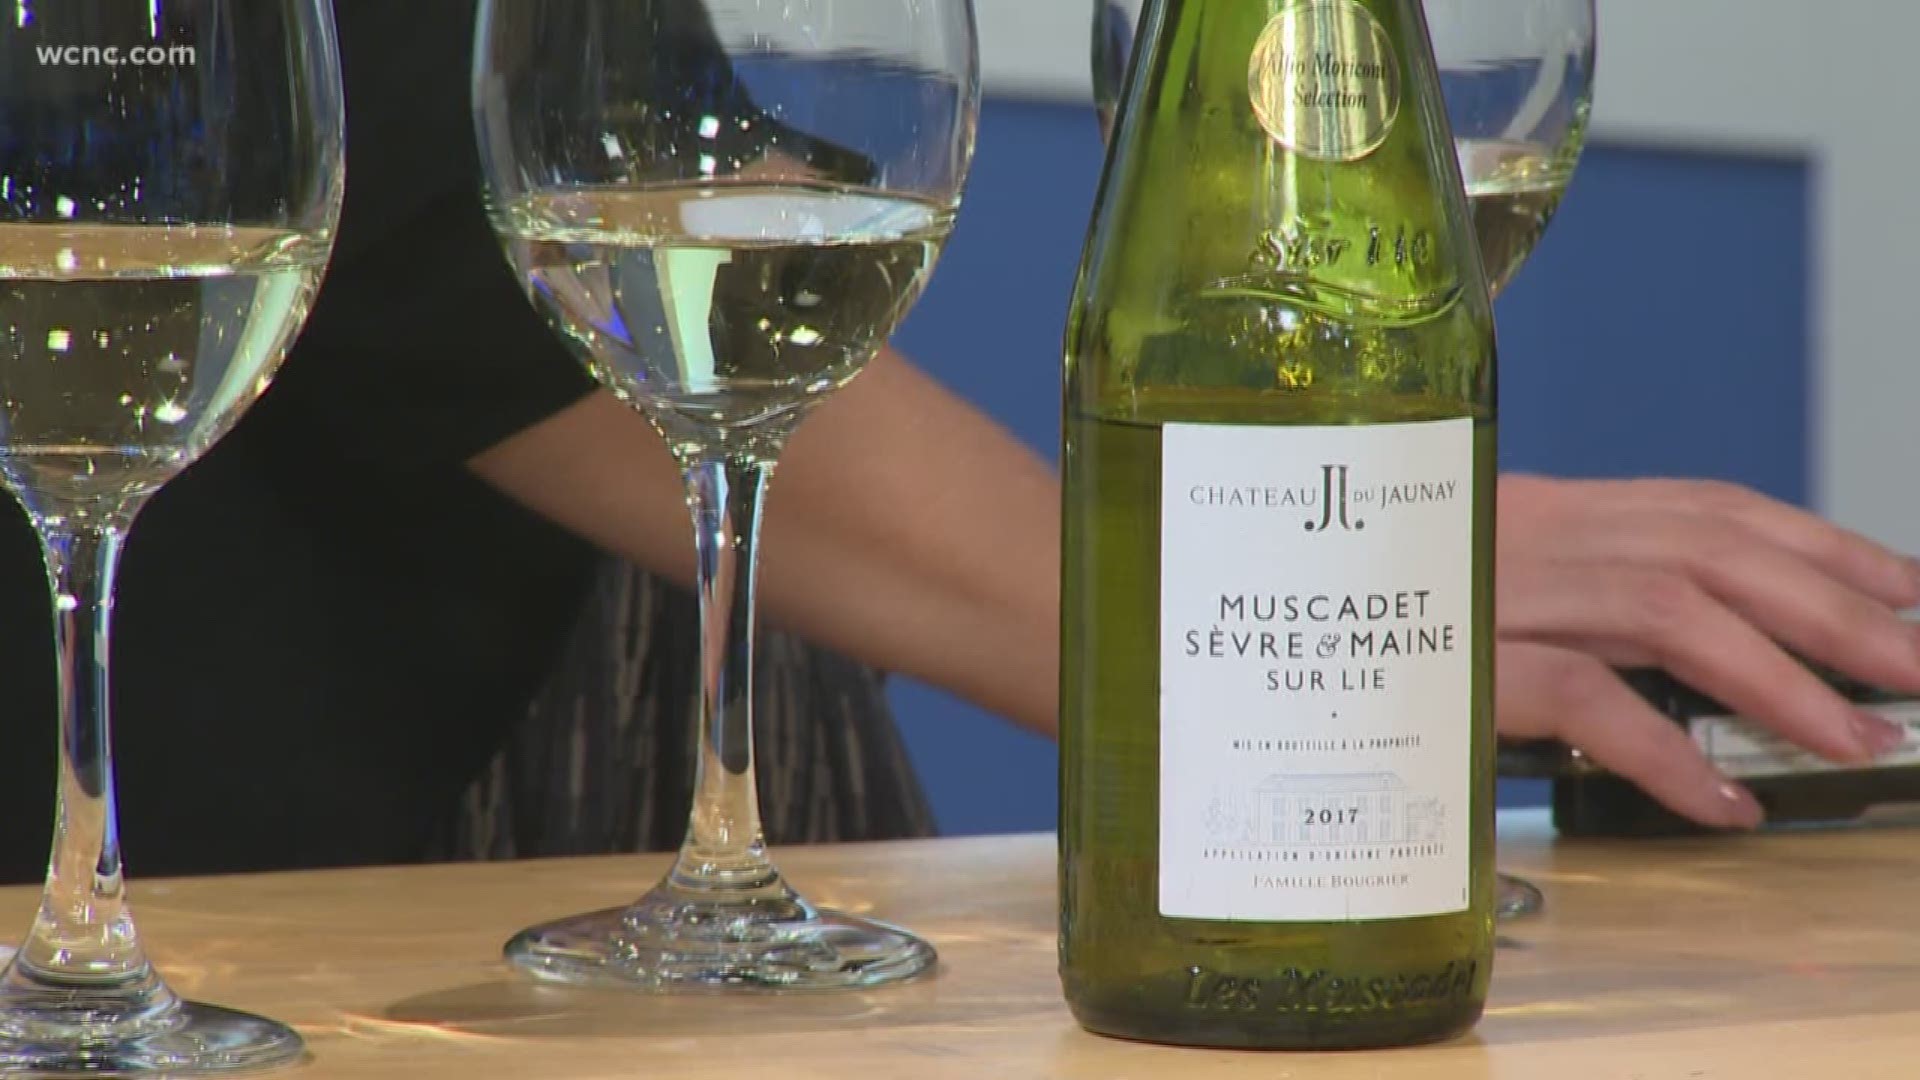 We taste test French wines that seem luxurious but are affordable!